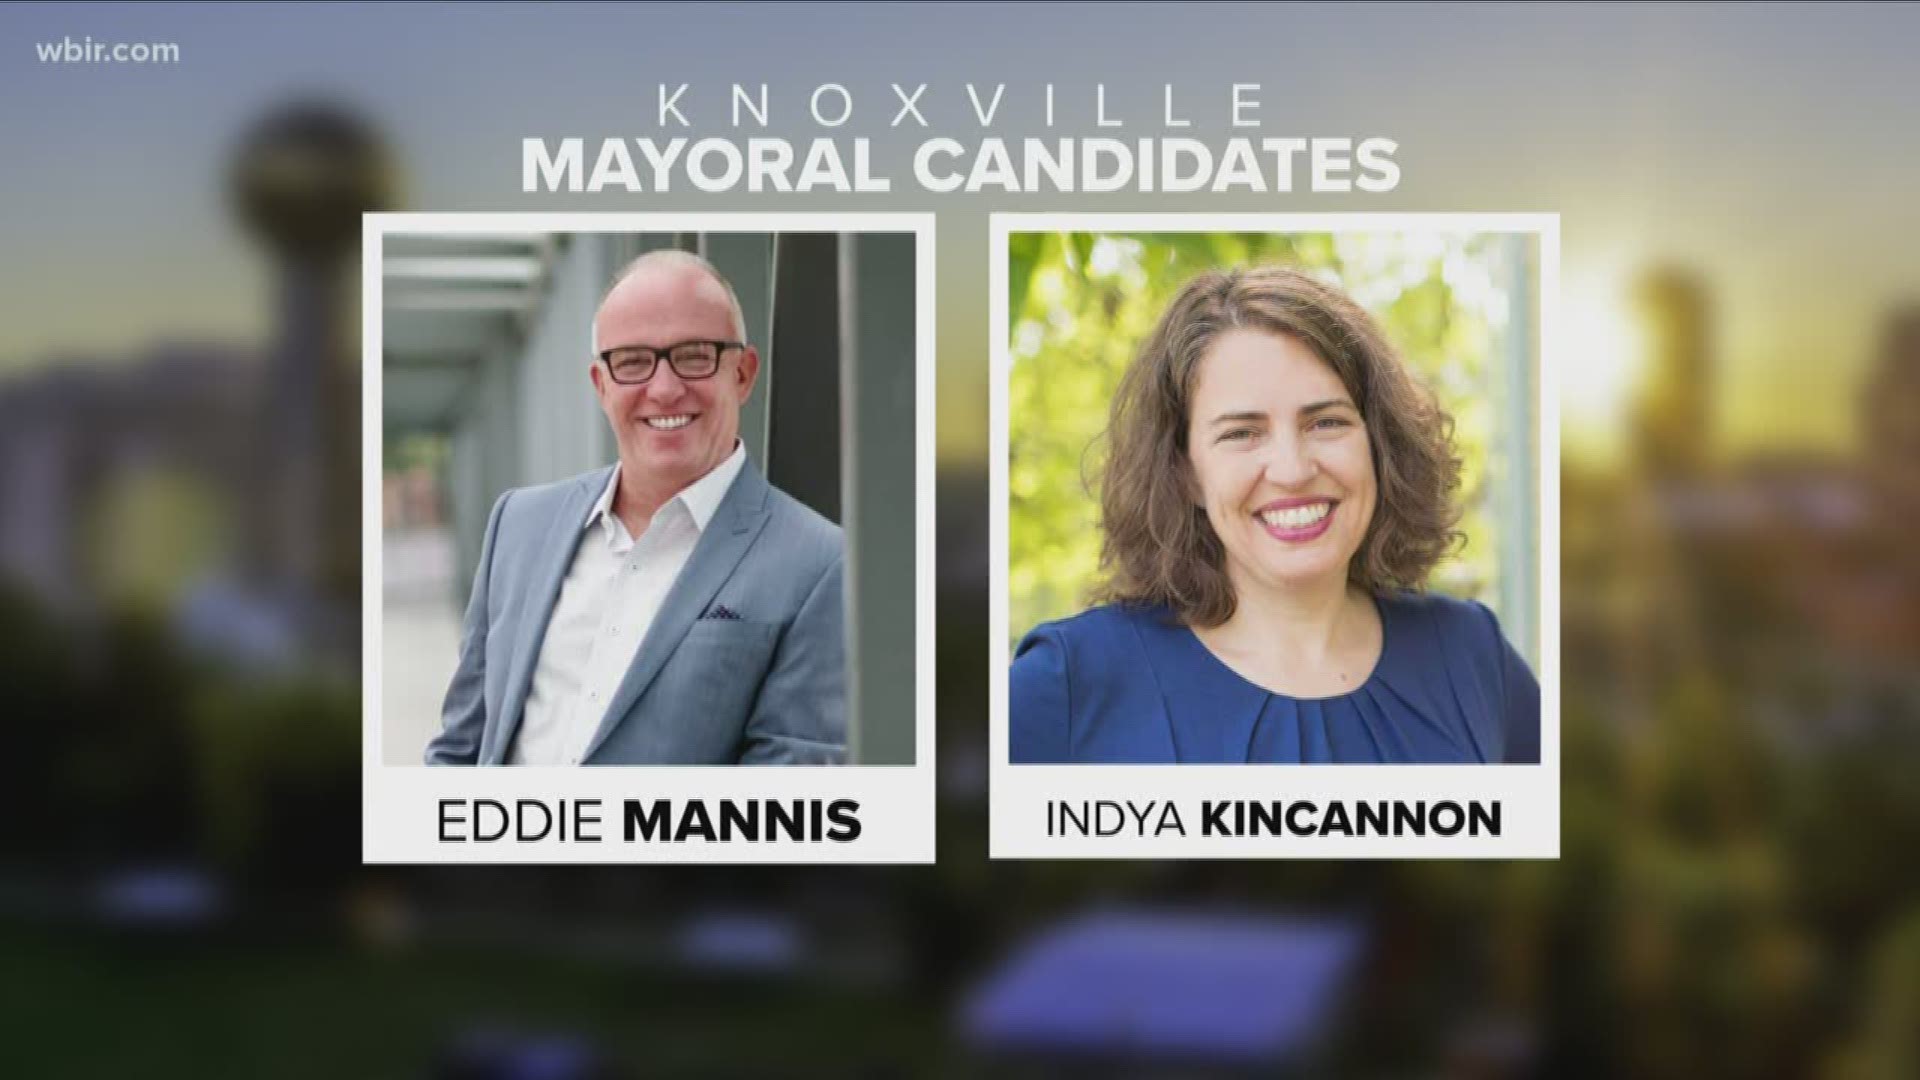 Soon, Knoxville will have a new mayor. Here's how you can make sure your vote counts.